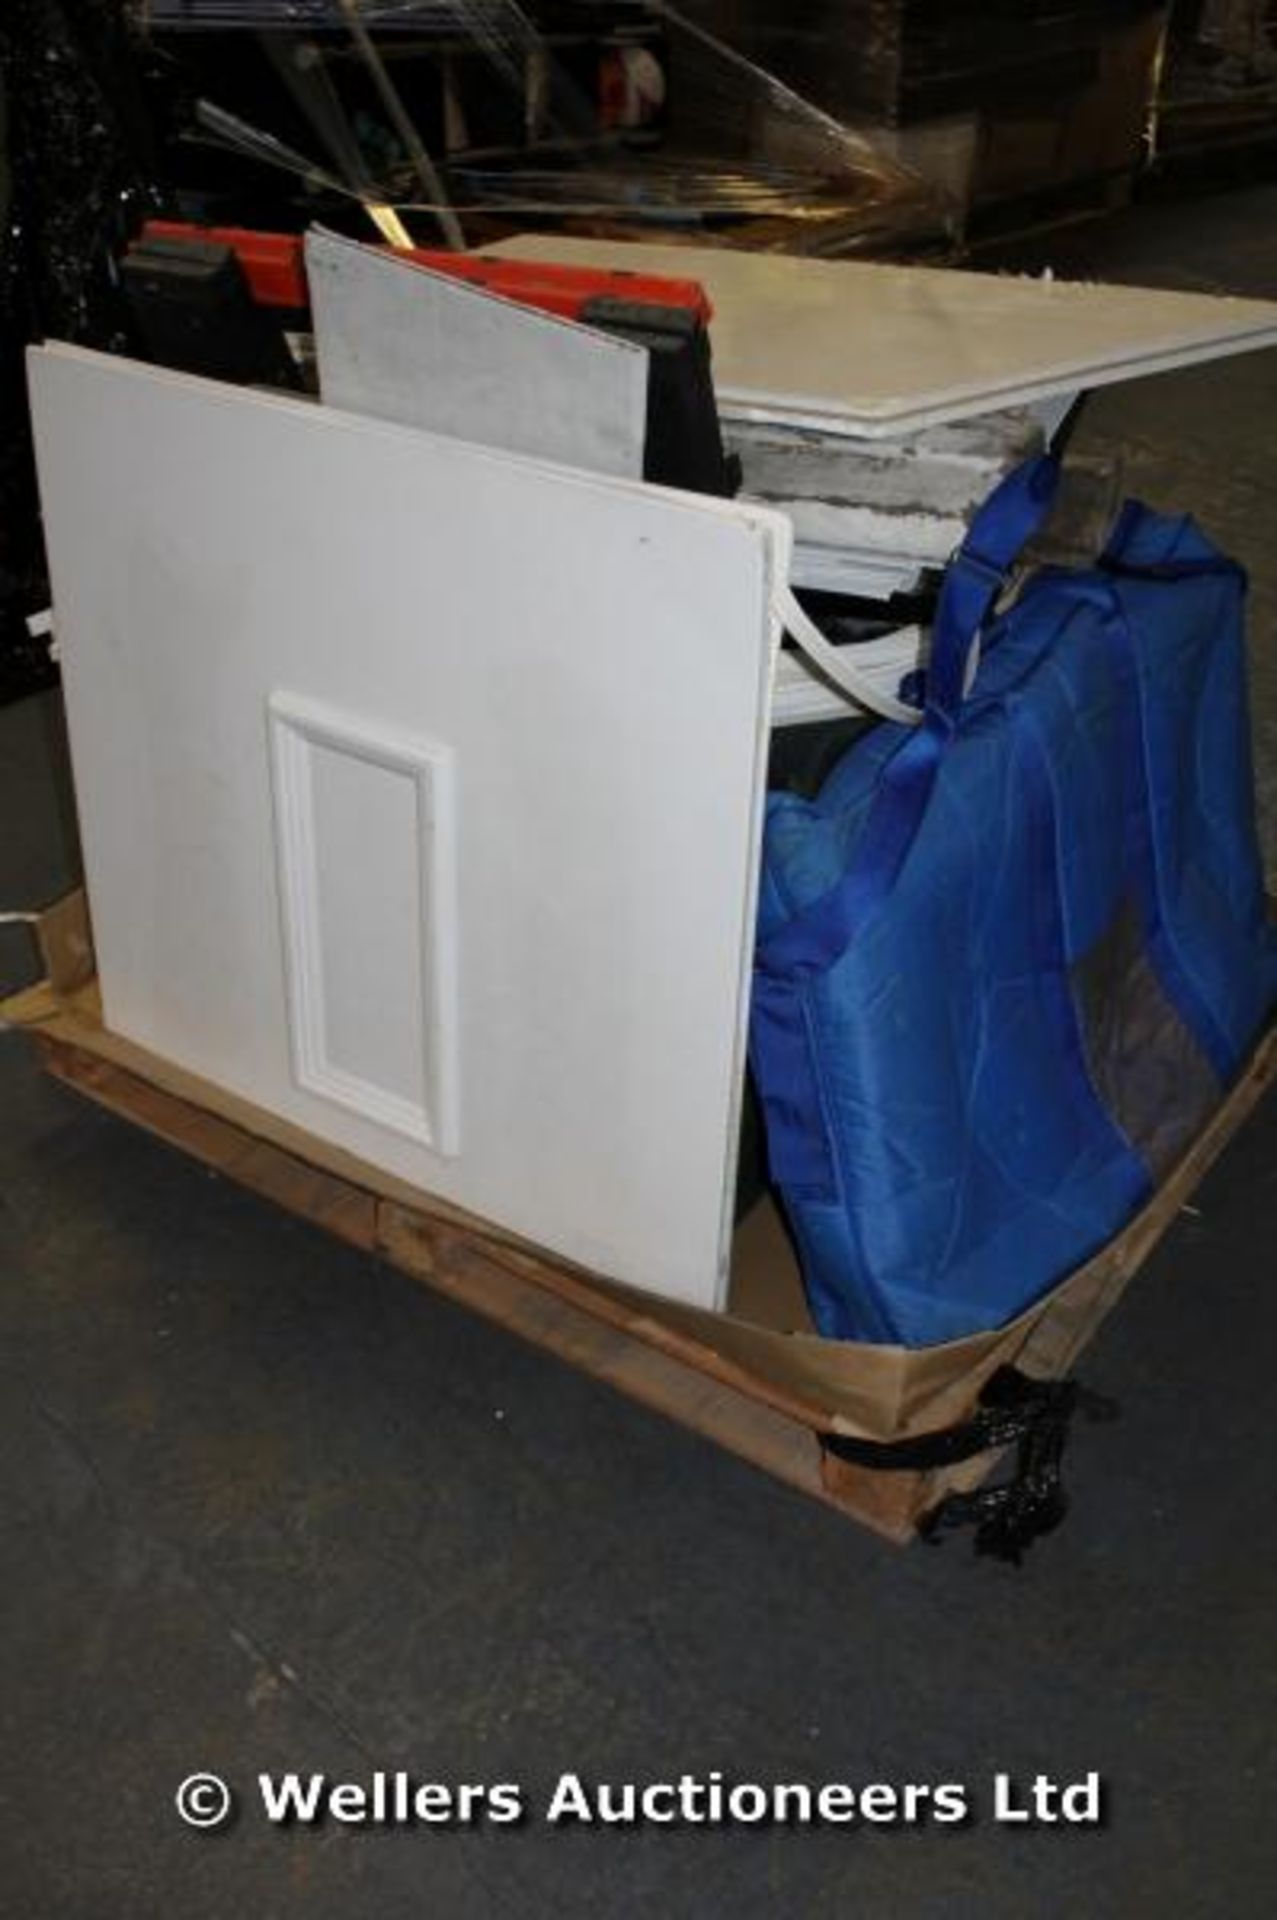 PALLET OF SELF STORAGE UNIT TO BE SOLD INCLUDING WINDOW FRAMES AND BRIC-A-BRAC / GRADE: UNCLAIMED